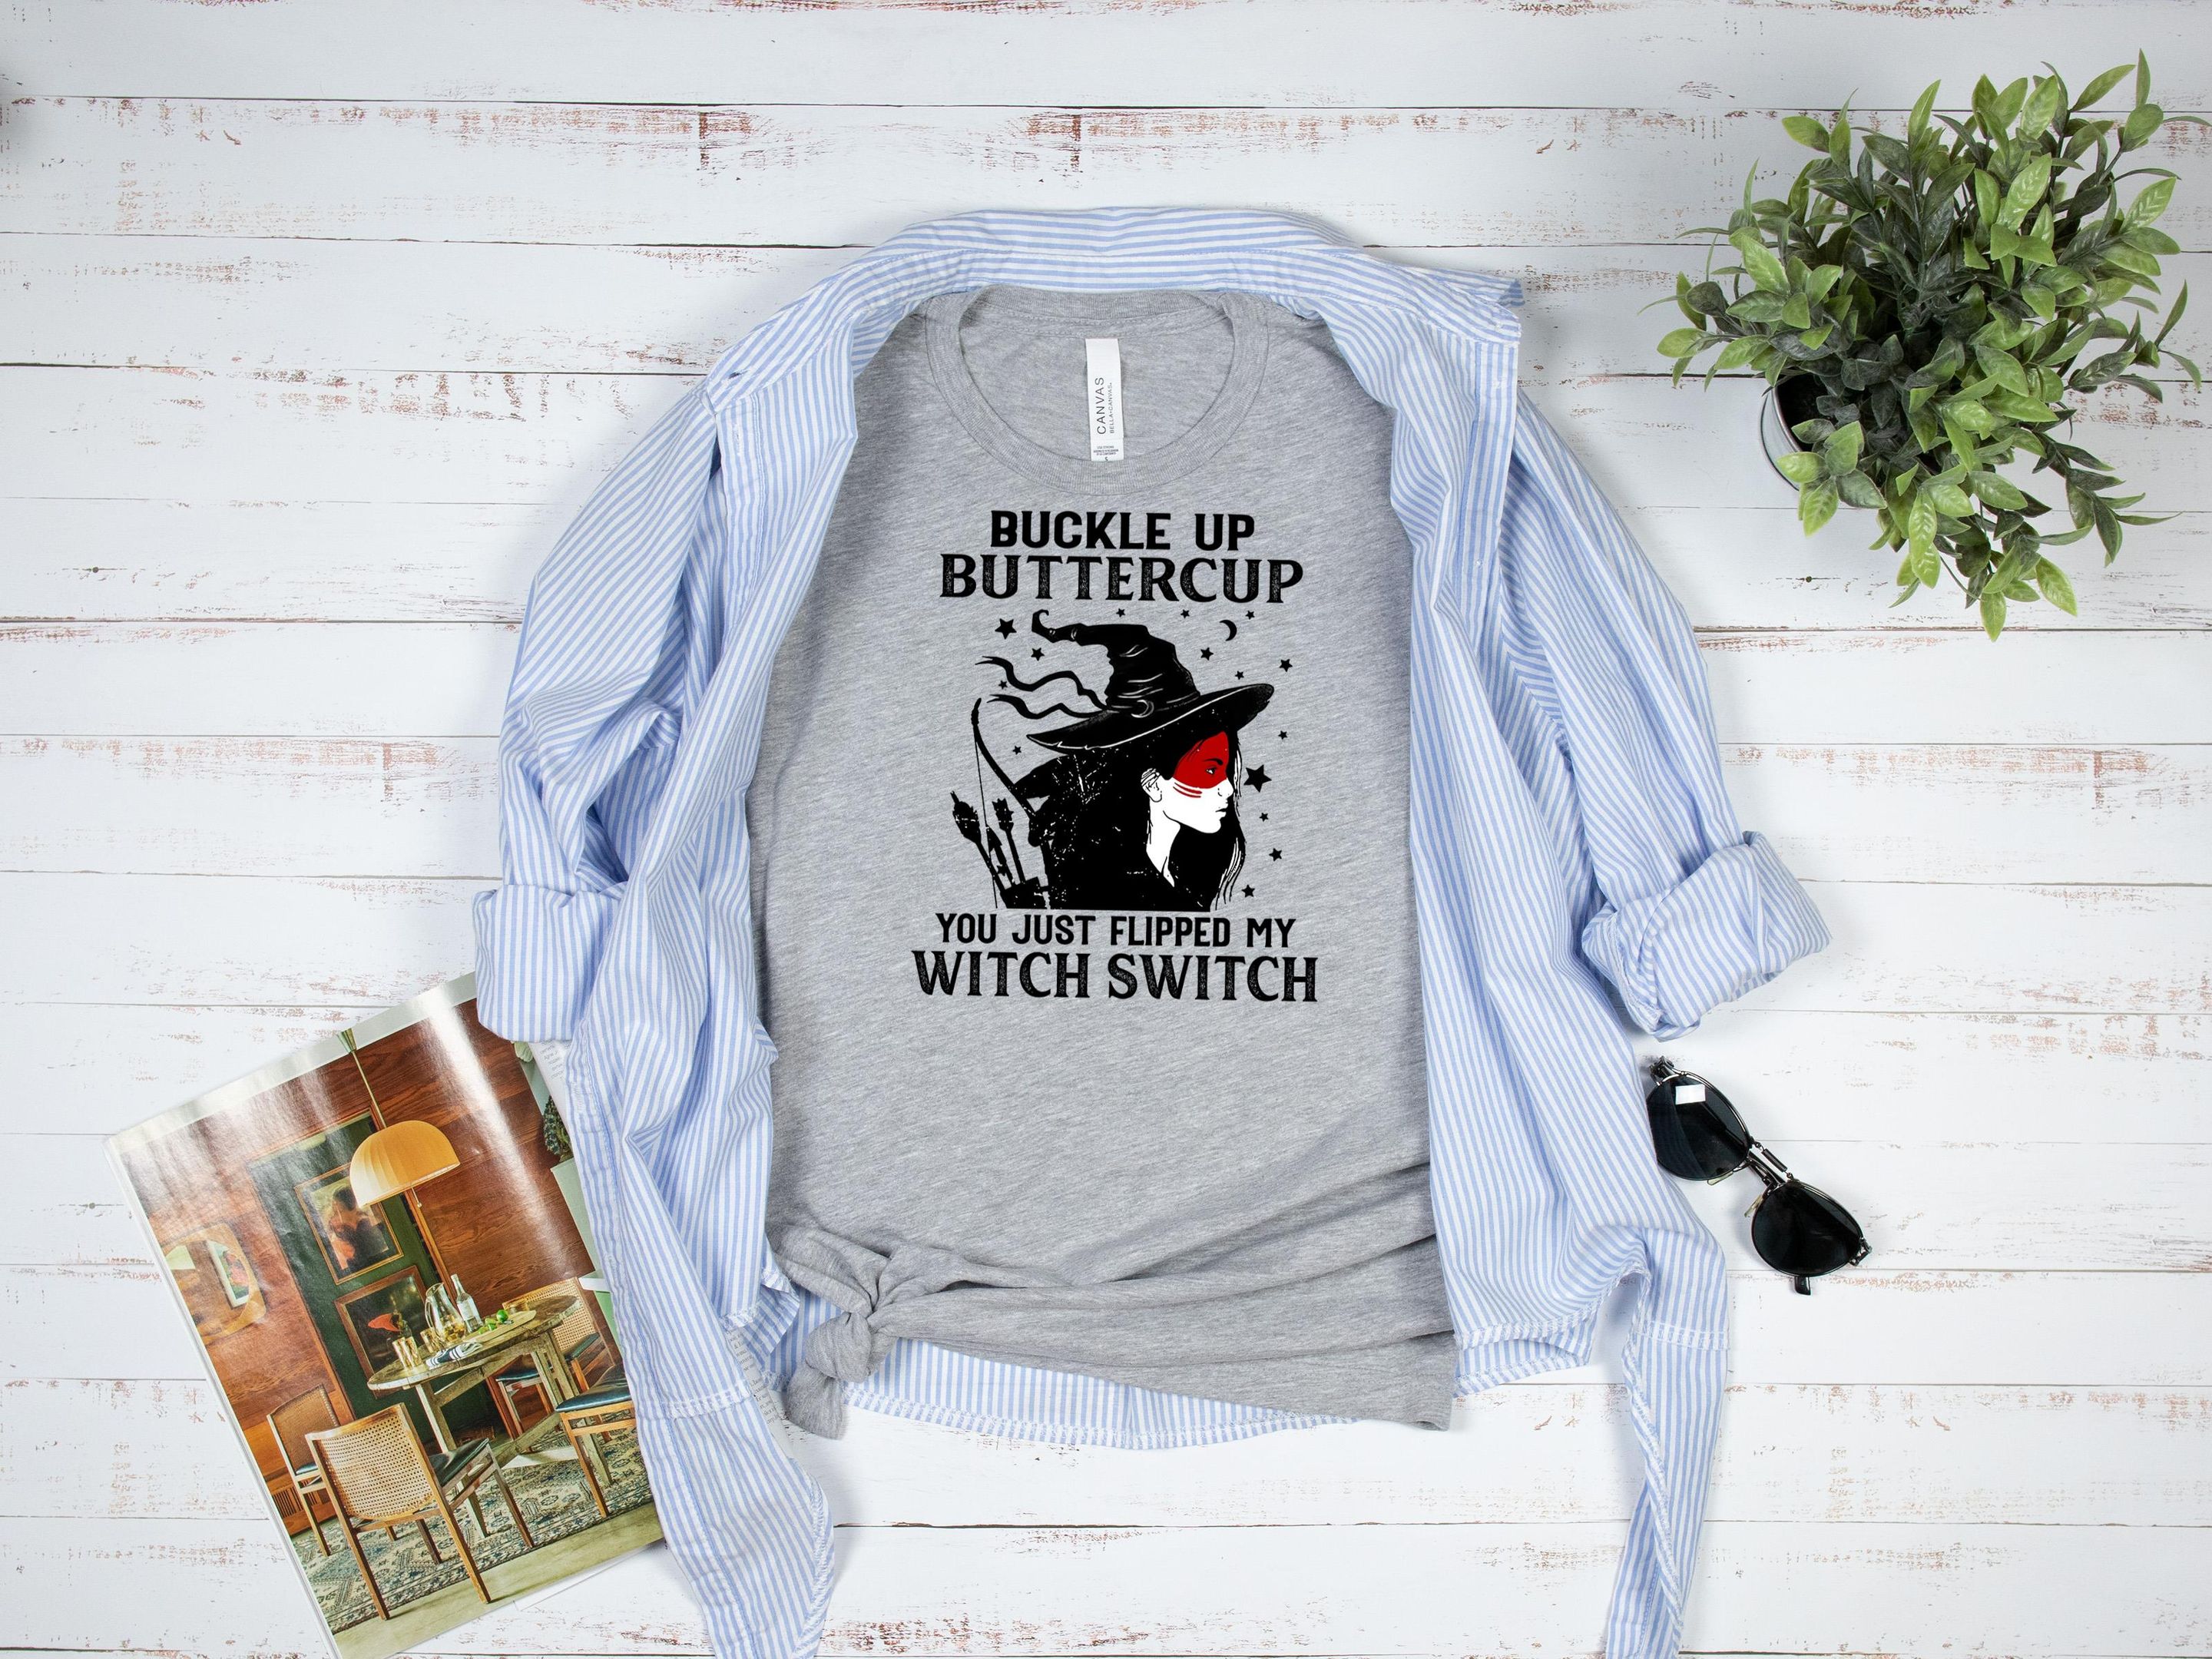 Buckle Up Buttercup Shirt, You Just Flipped My Witch Switch Shirt, Halloween Shirt, Witch Shirt, Native Witch Shirt (2)